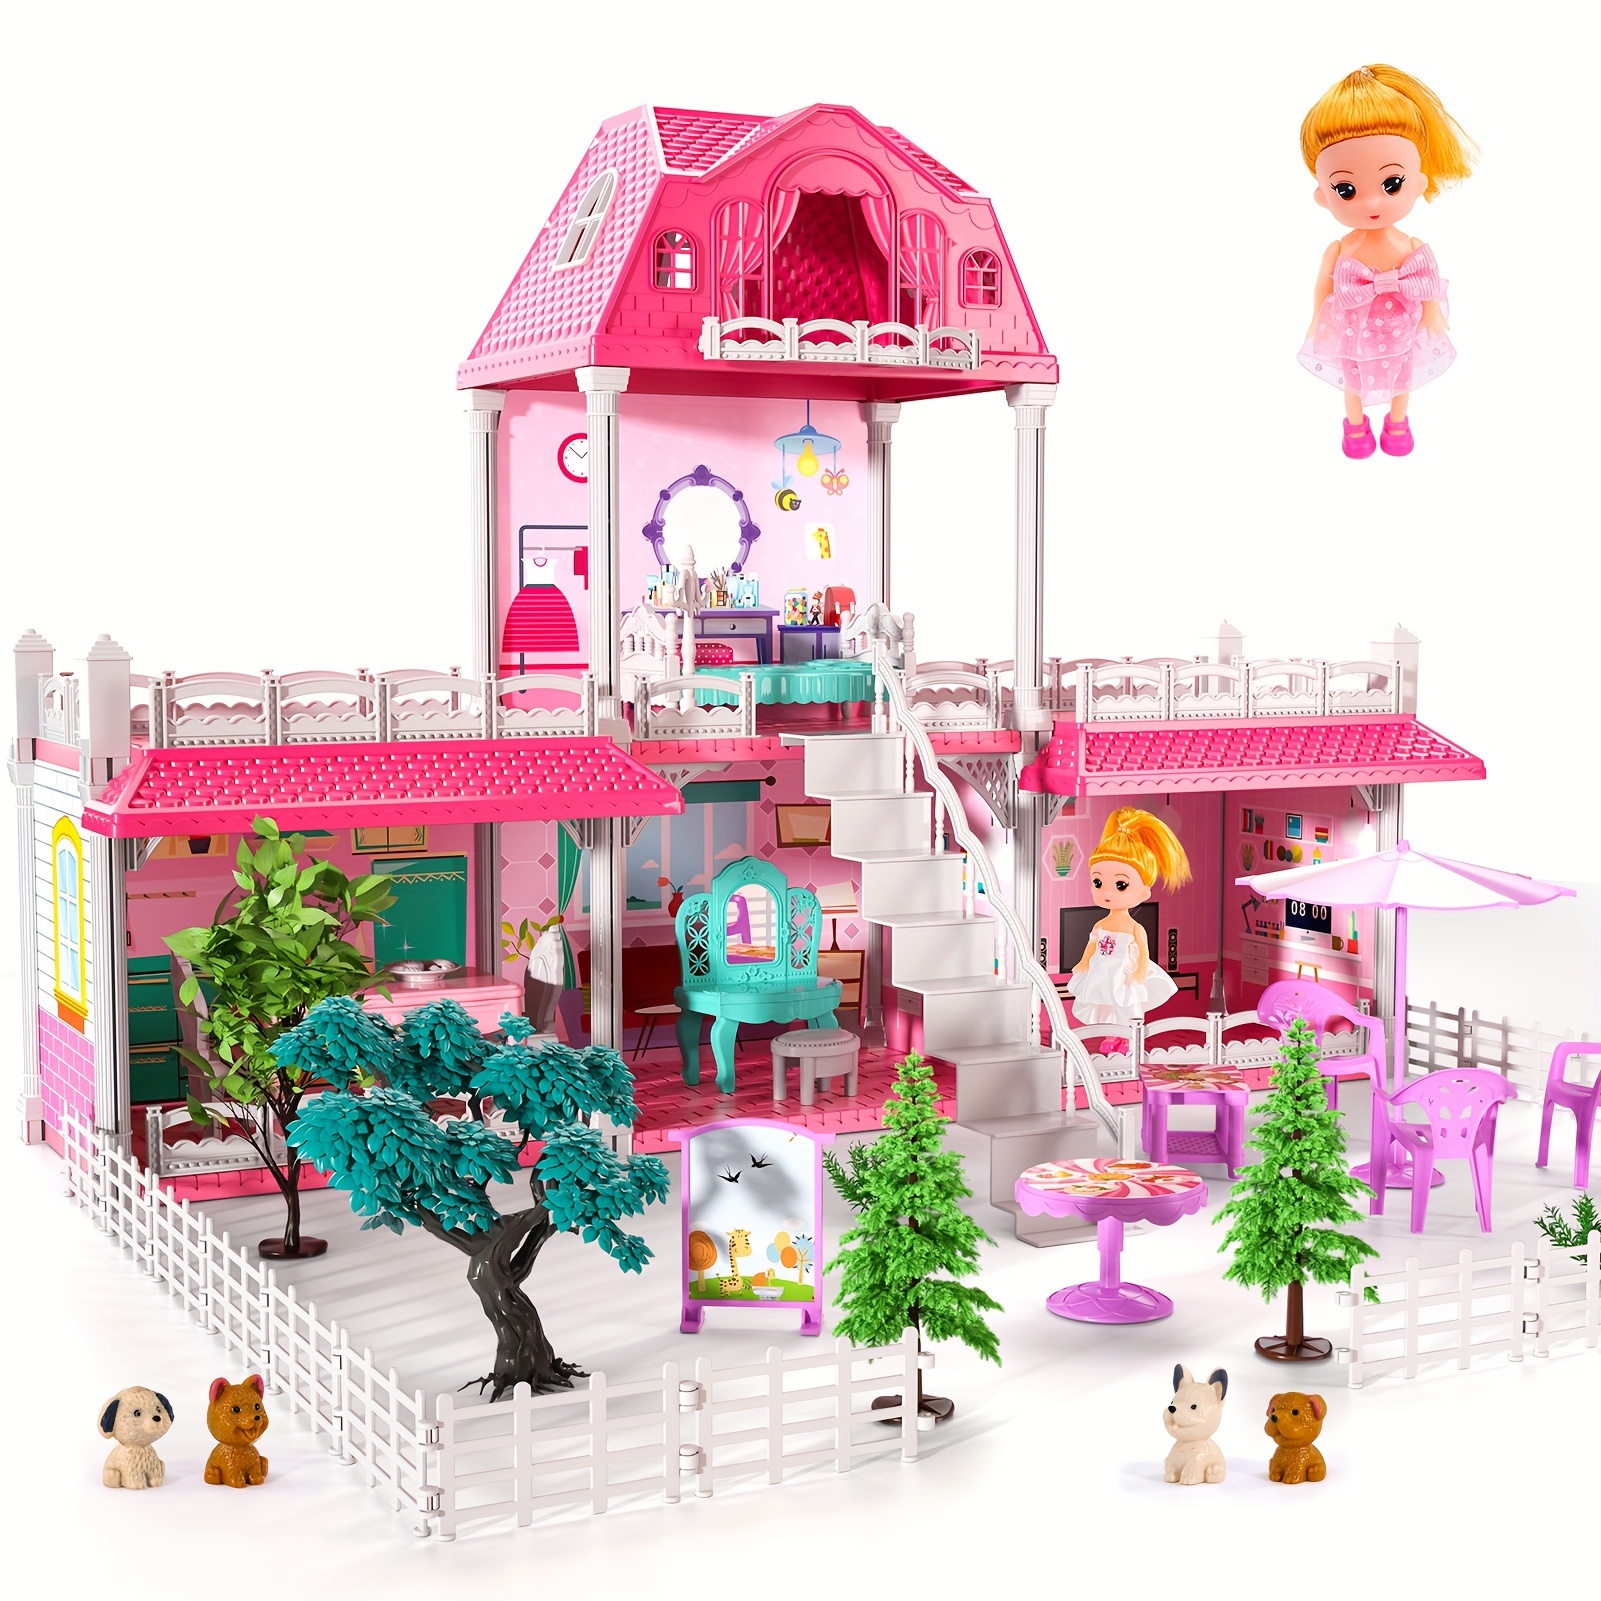 

Doll House For Toddlers Kids Girls, Diy Dollhouse Girl Toys With Dolls, Pets And Furniture Accessories